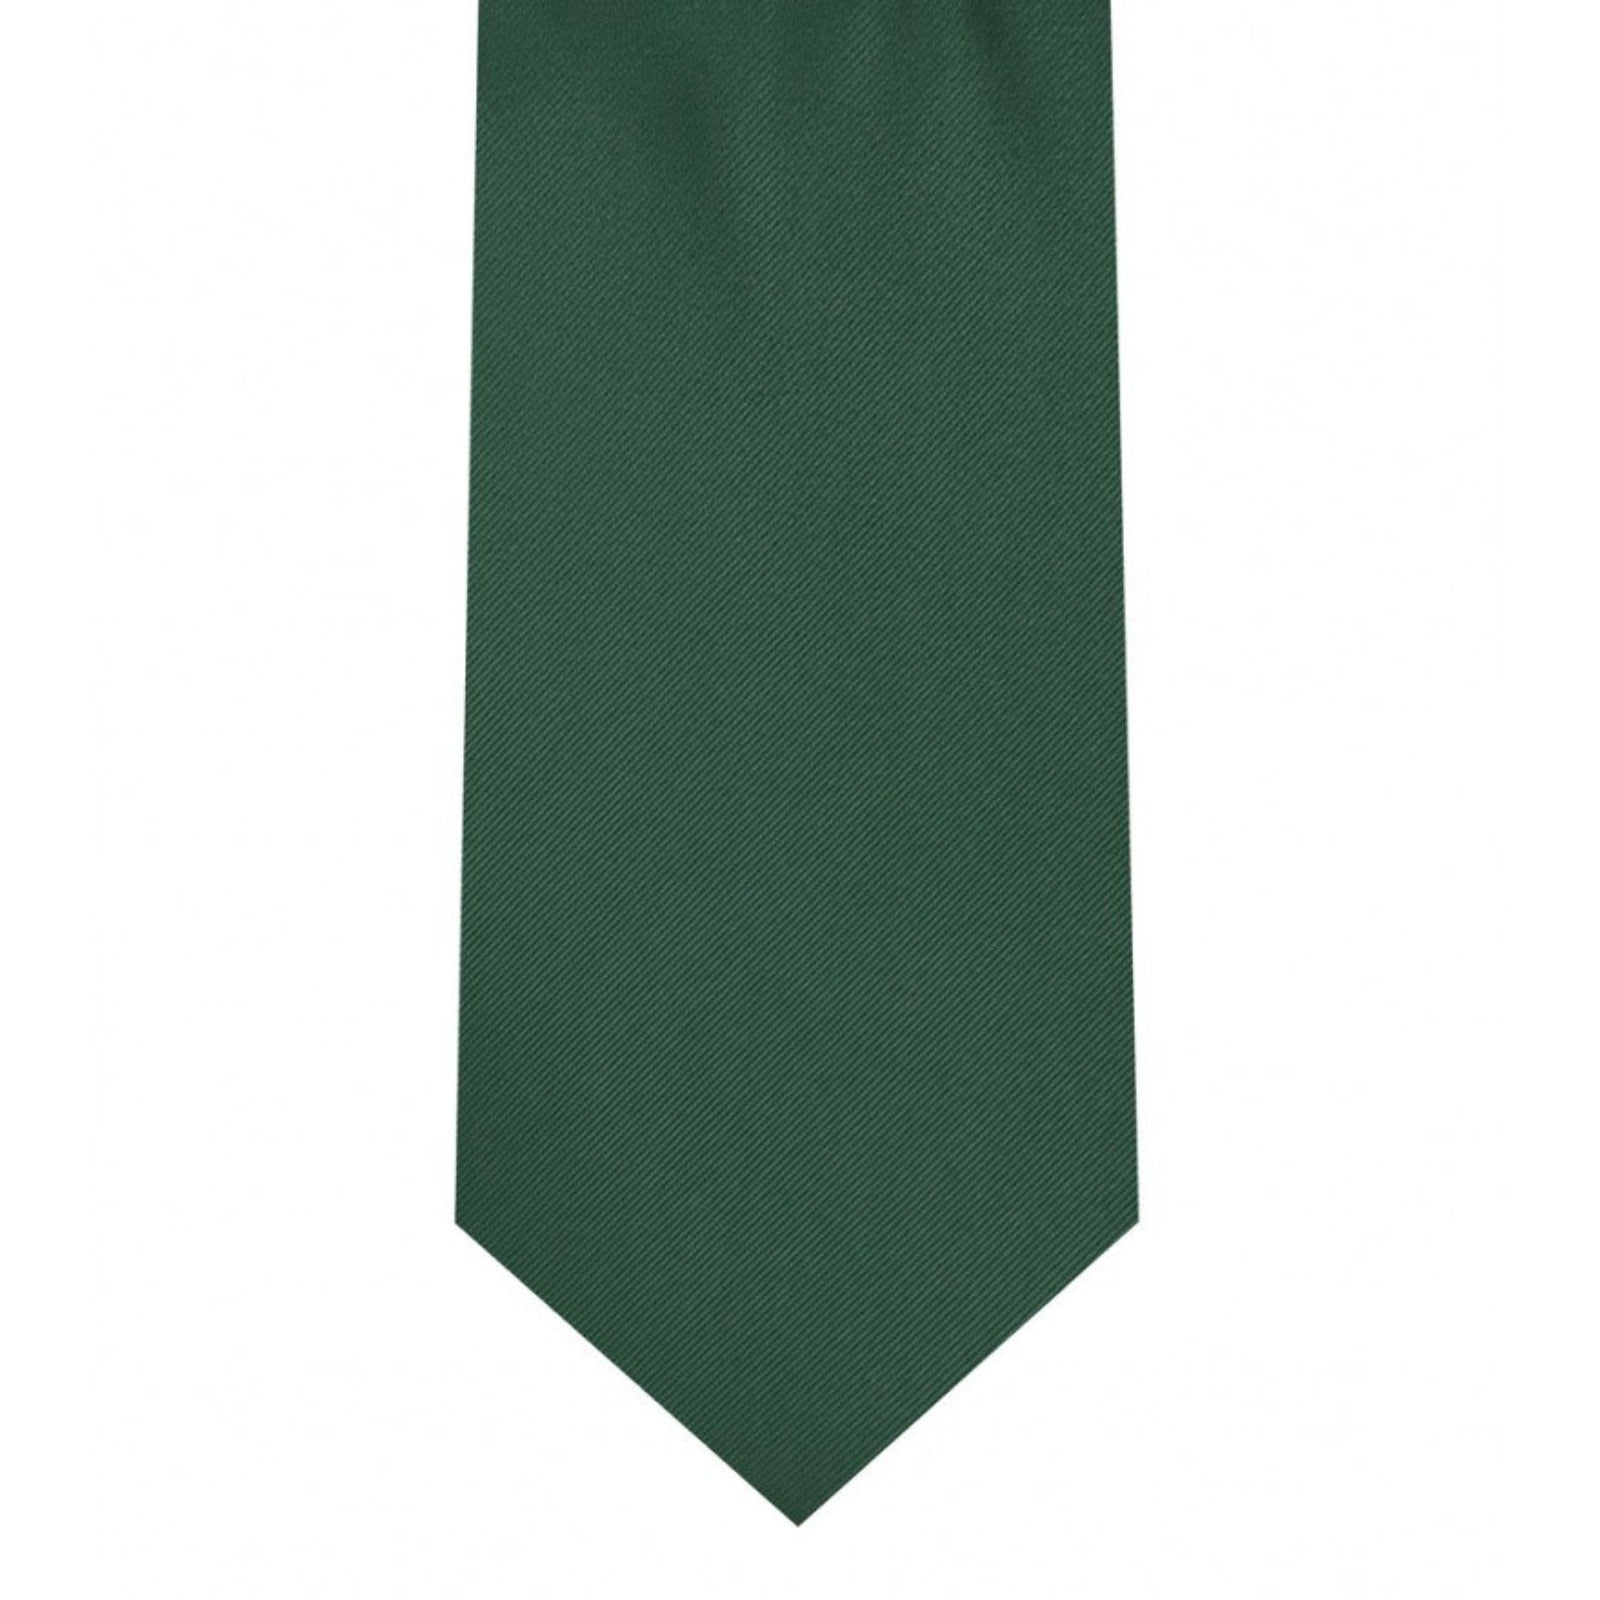 Classic Forest Green Tie Skinny width 2.75 inches With Matching Pocket Square | KCT Menswear